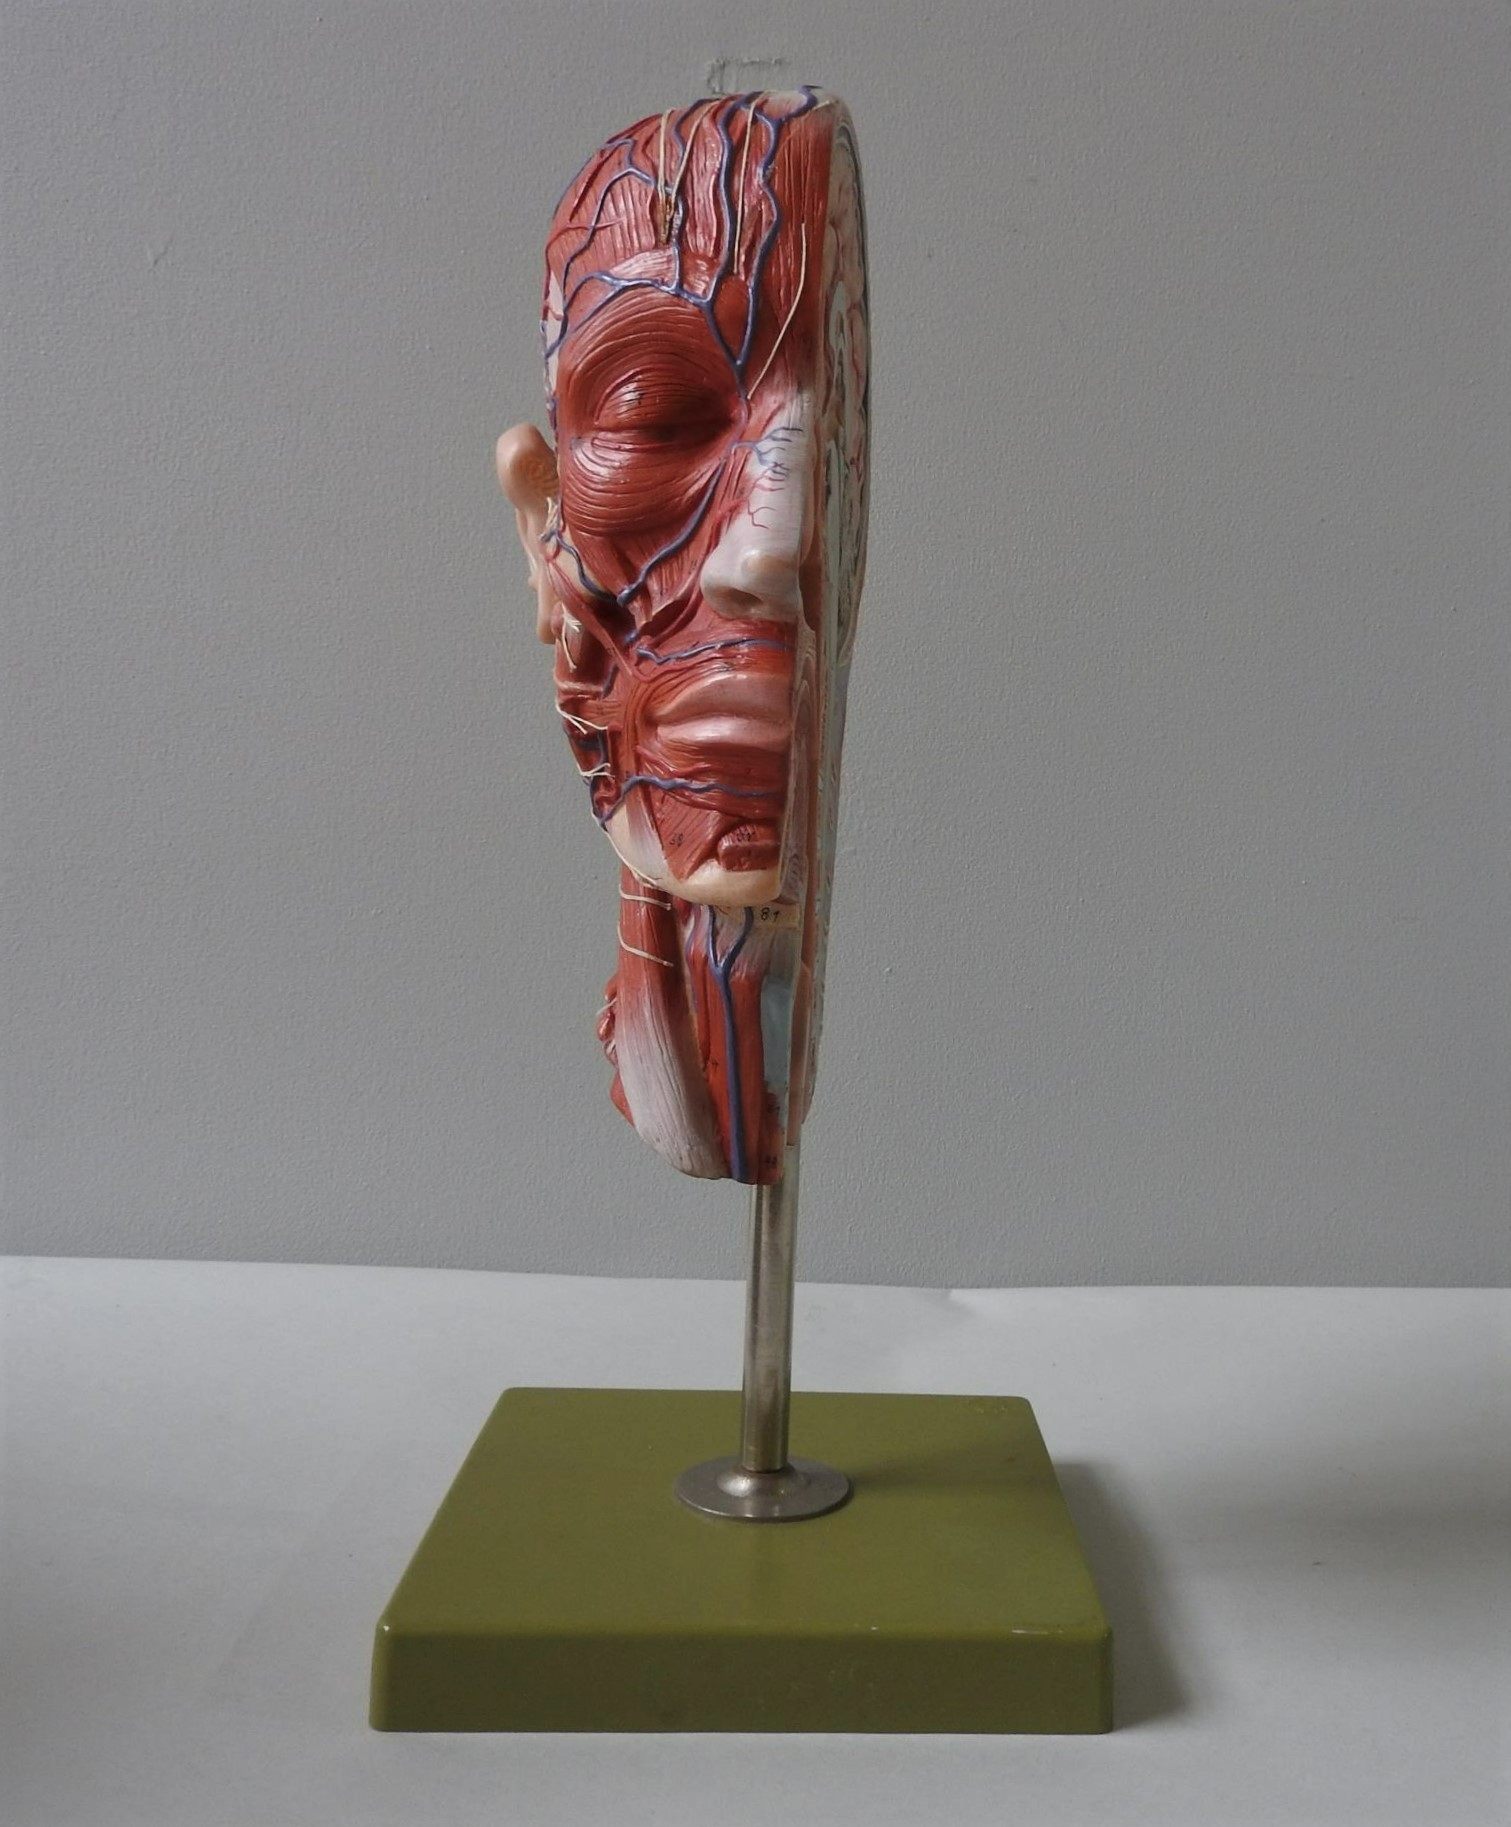 A VINTAGE SOMSO ANATOMY CROSS SECTION MODEL OF A HUMAN HEAD, mounted on a plinth base, 42cm high - Image 2 of 2